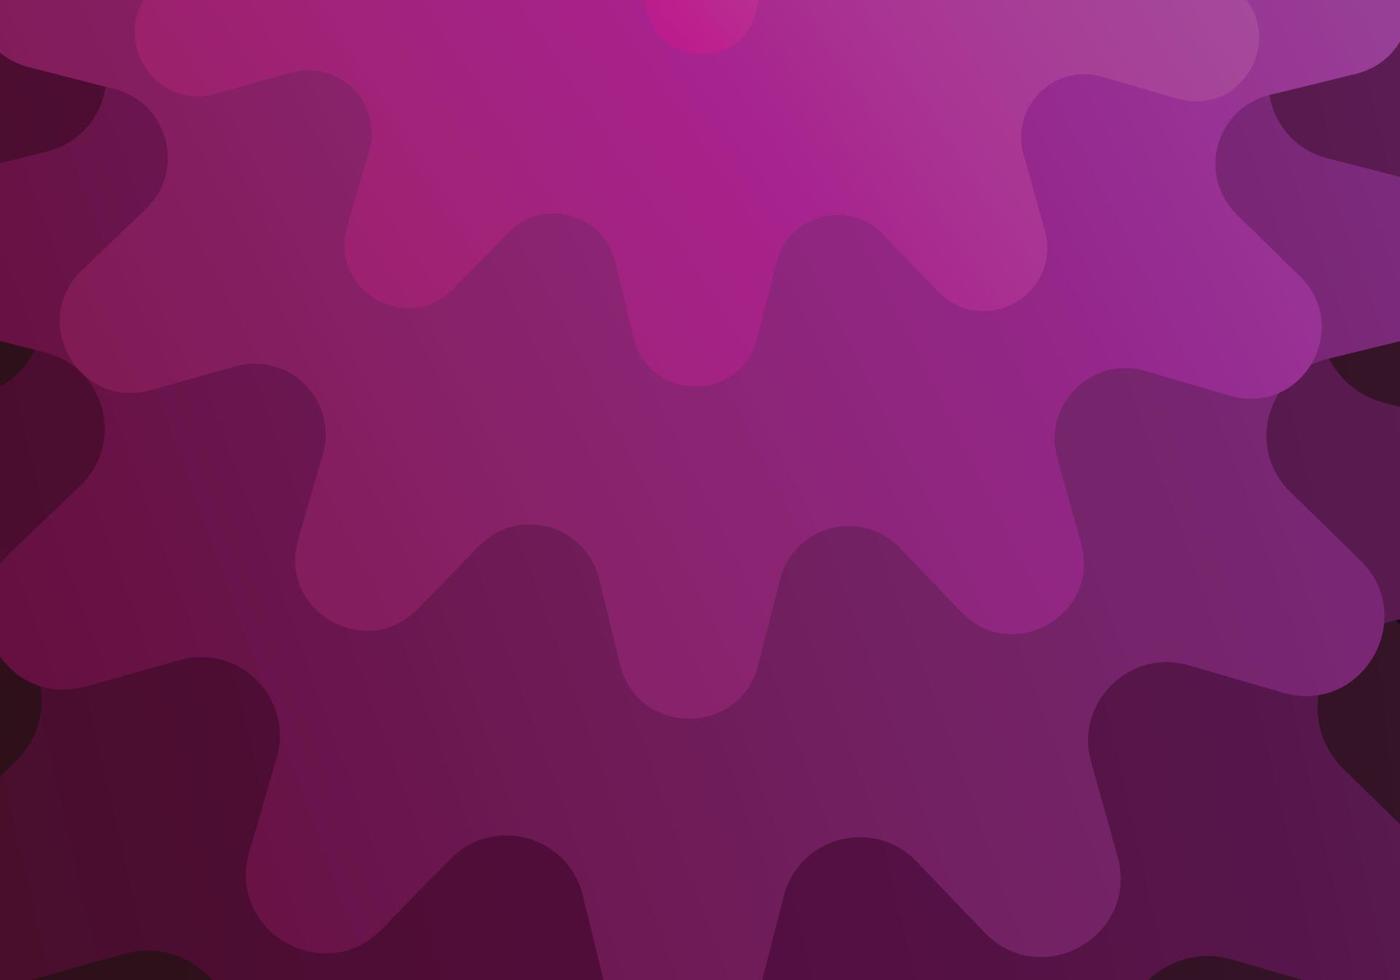 Abstract background consisting of wavy wavy curves. Gradient from light purple to dark vector